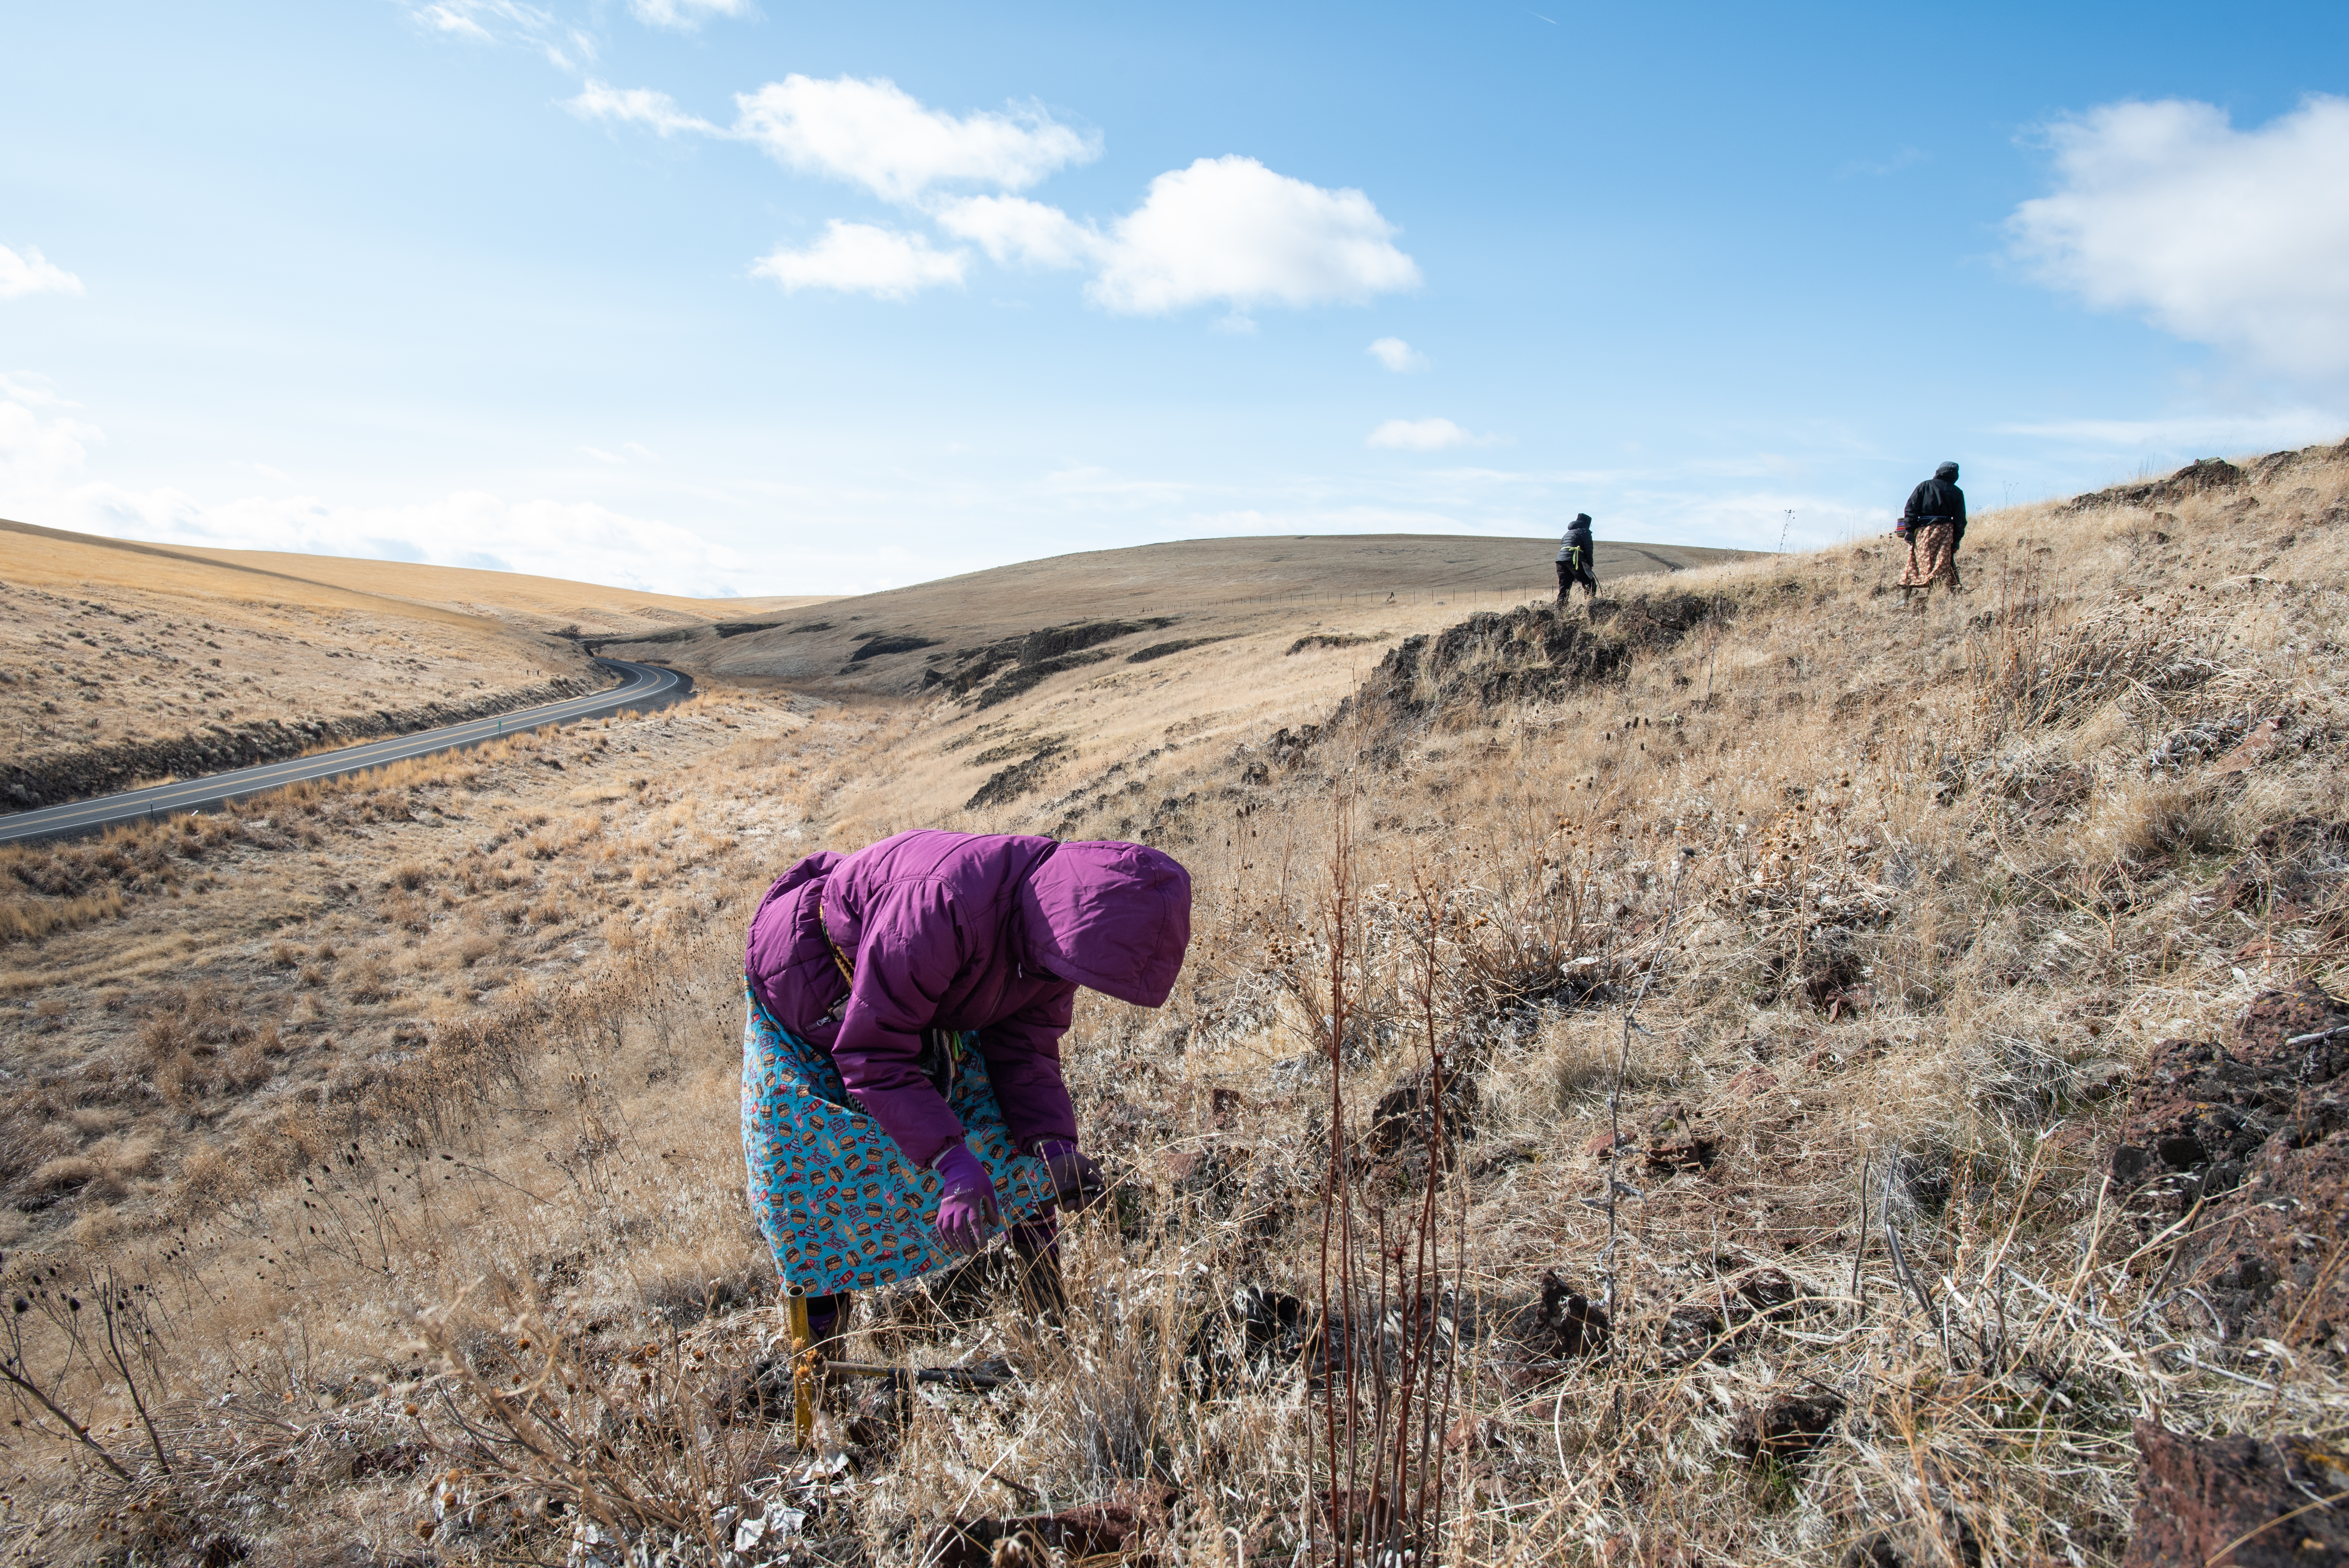 Látis Nowland, of Mission, Oregon, digs for wild celery, or latit latit in the Umatilla language, as Tatum Ganuelas, right, and Beth Looney search the surrounding hills. Nowland said she’s been doing this work since the Sunday after she was born, when her mother, Trinette Minthorn, brought her along in a baby board. The women were among a group of about 15 women and girls who gathered for the sacred tradition that marks the arrival of spring for the Confederated Tribes of the Umatilla Indian Reservation